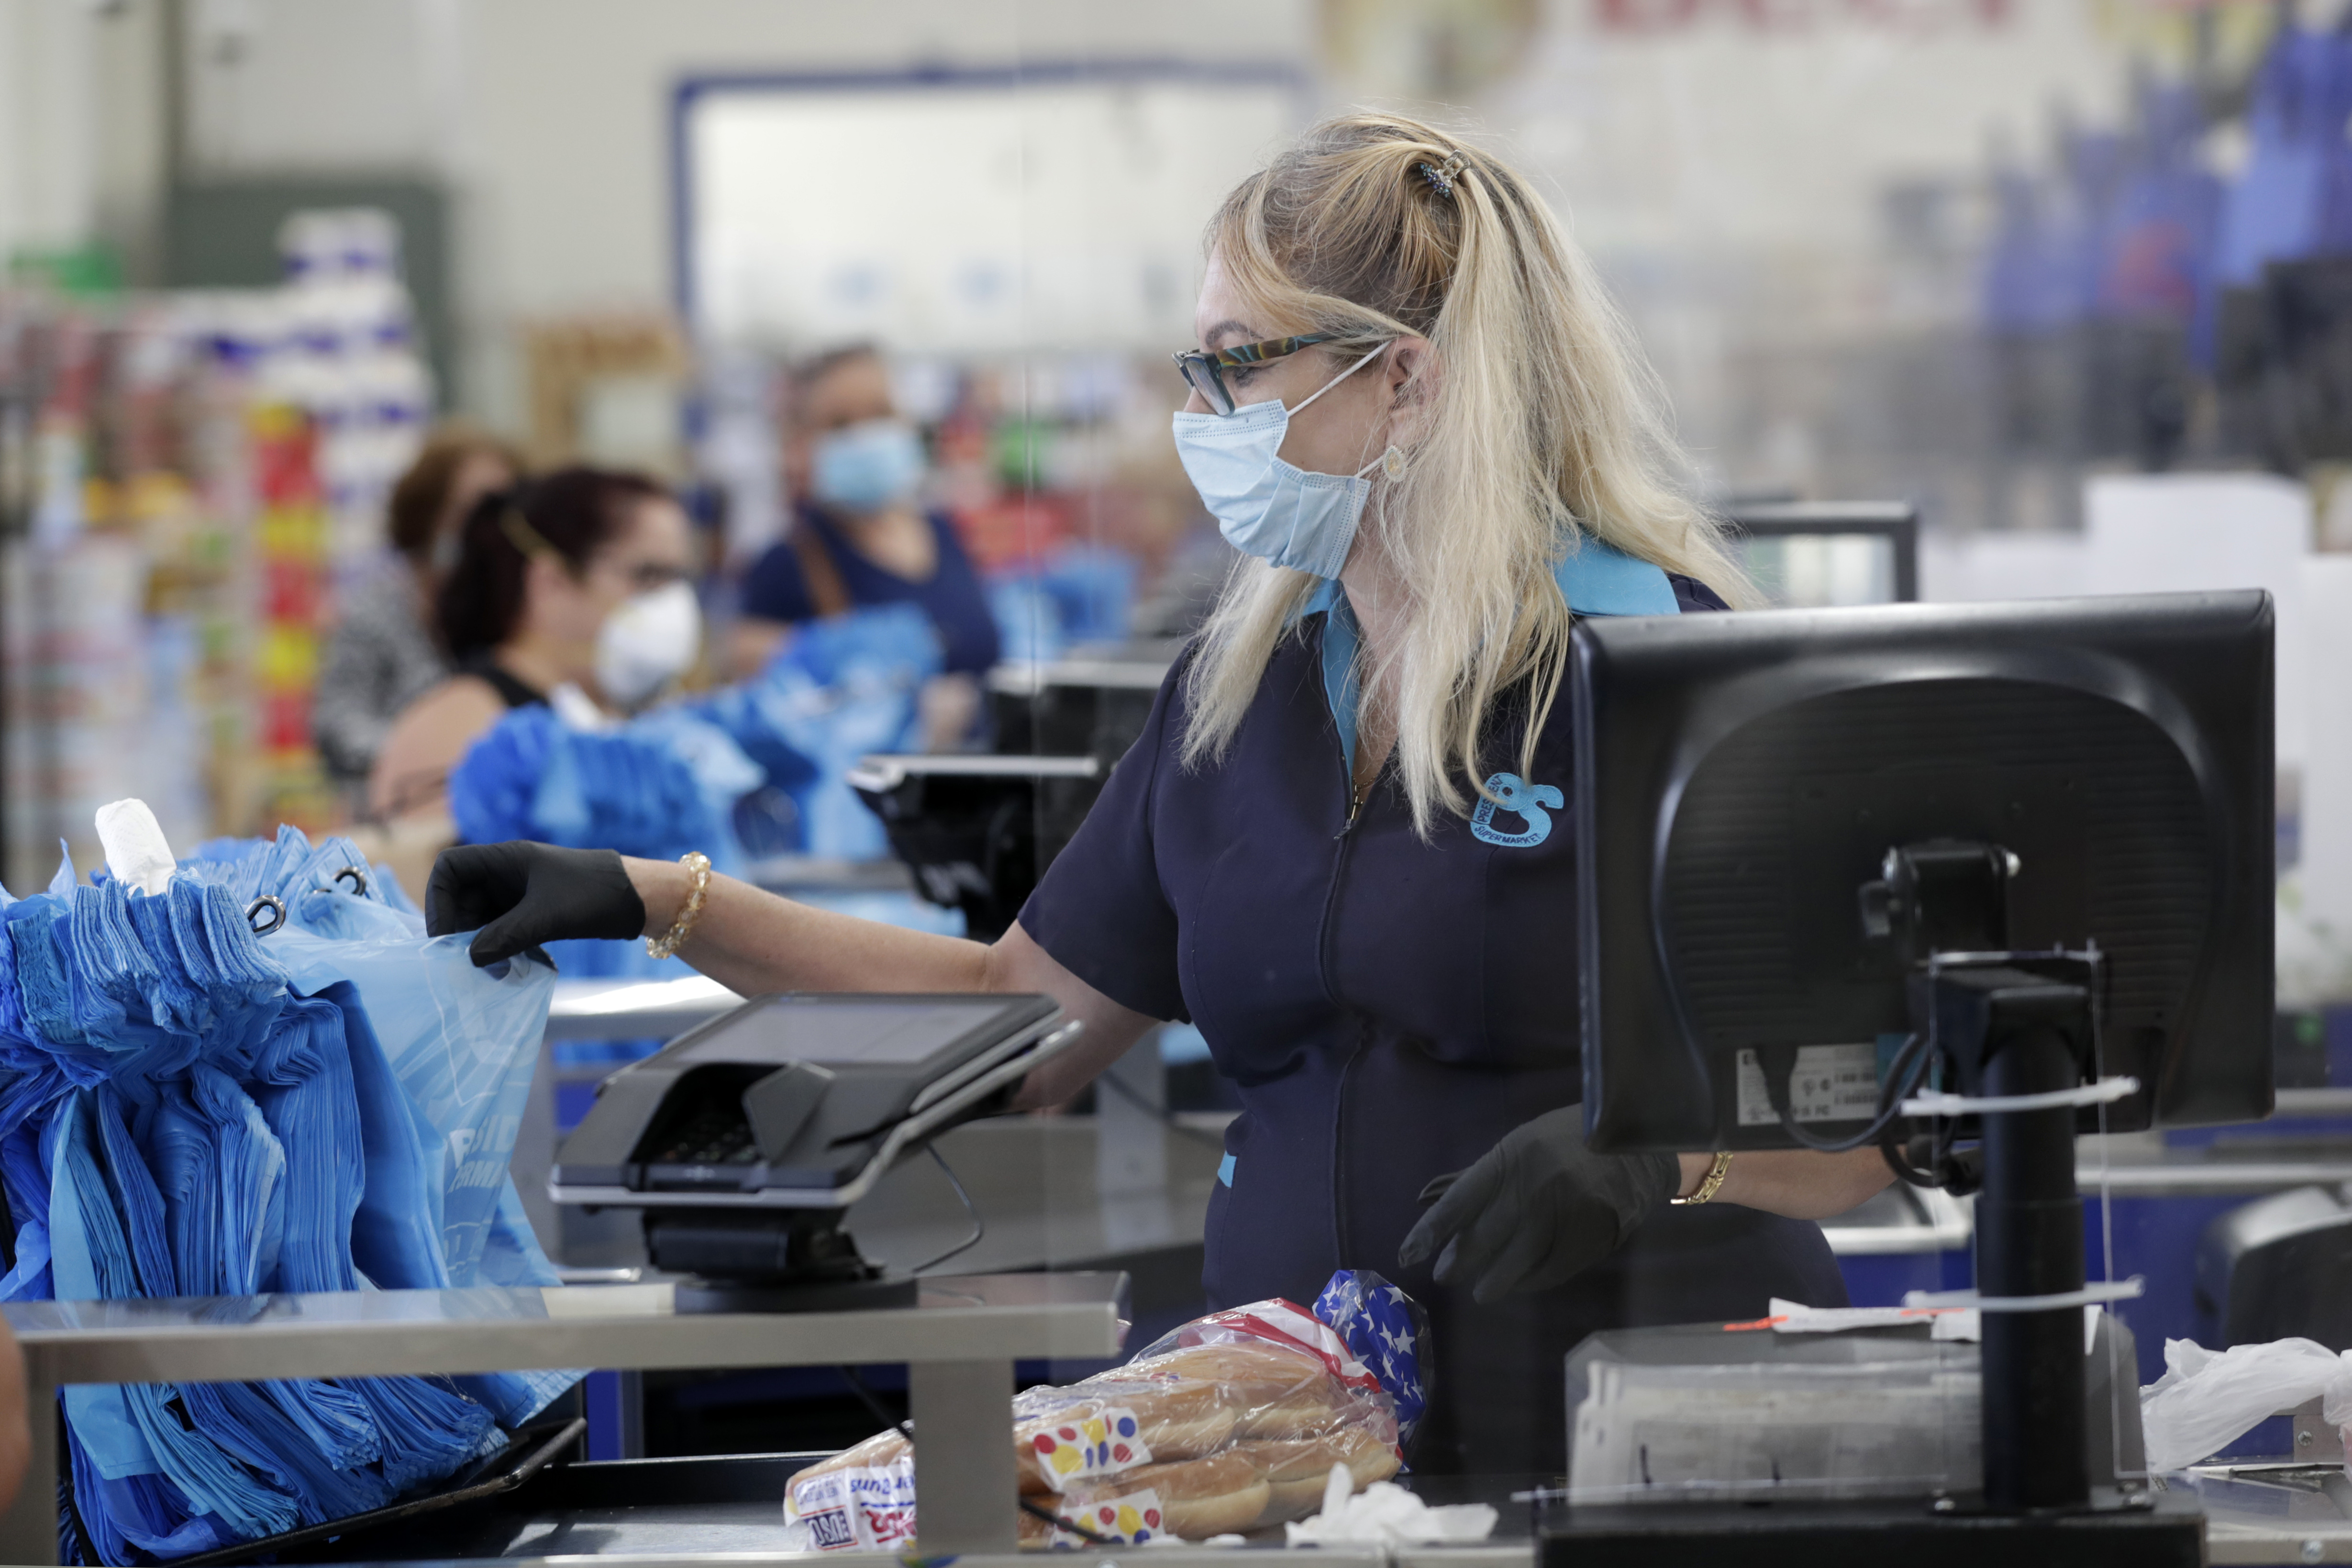 Cashier Mercedes Peña wears a protective mask as she works behind a plastic shield at the Presidente Supermarket during the new coronavirus pandemic, Tuesday, April 21, 2020, in Miami. All employees are required to wear masks which are provided by the company. (AP Photo/Lynne Sladky)